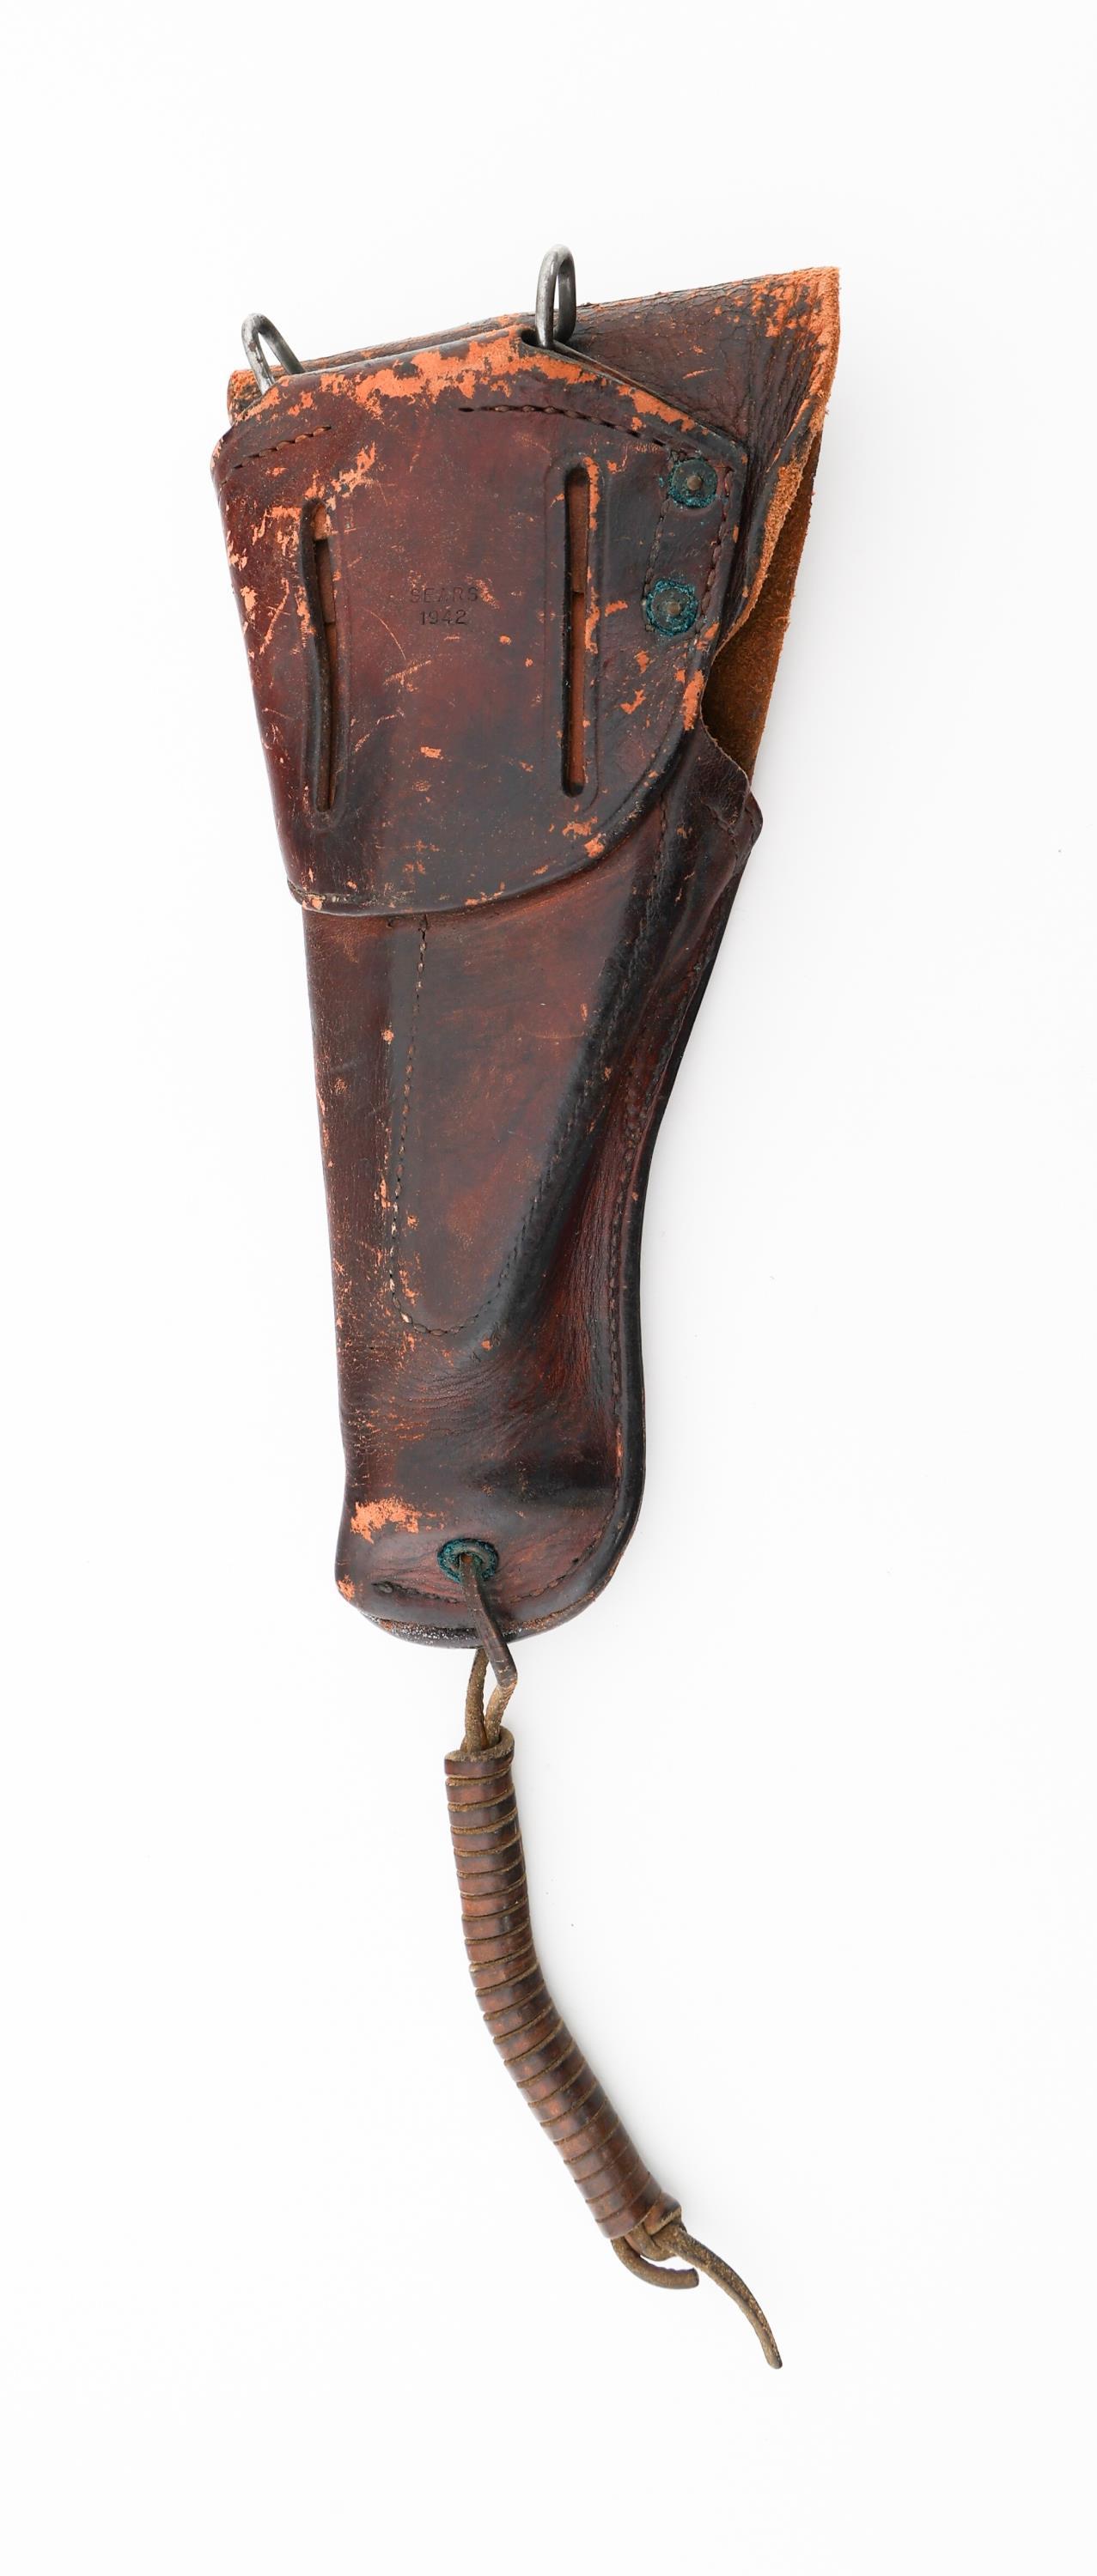 WWII US ARMY 1911 LEATHER PISTOL HOLSTERS